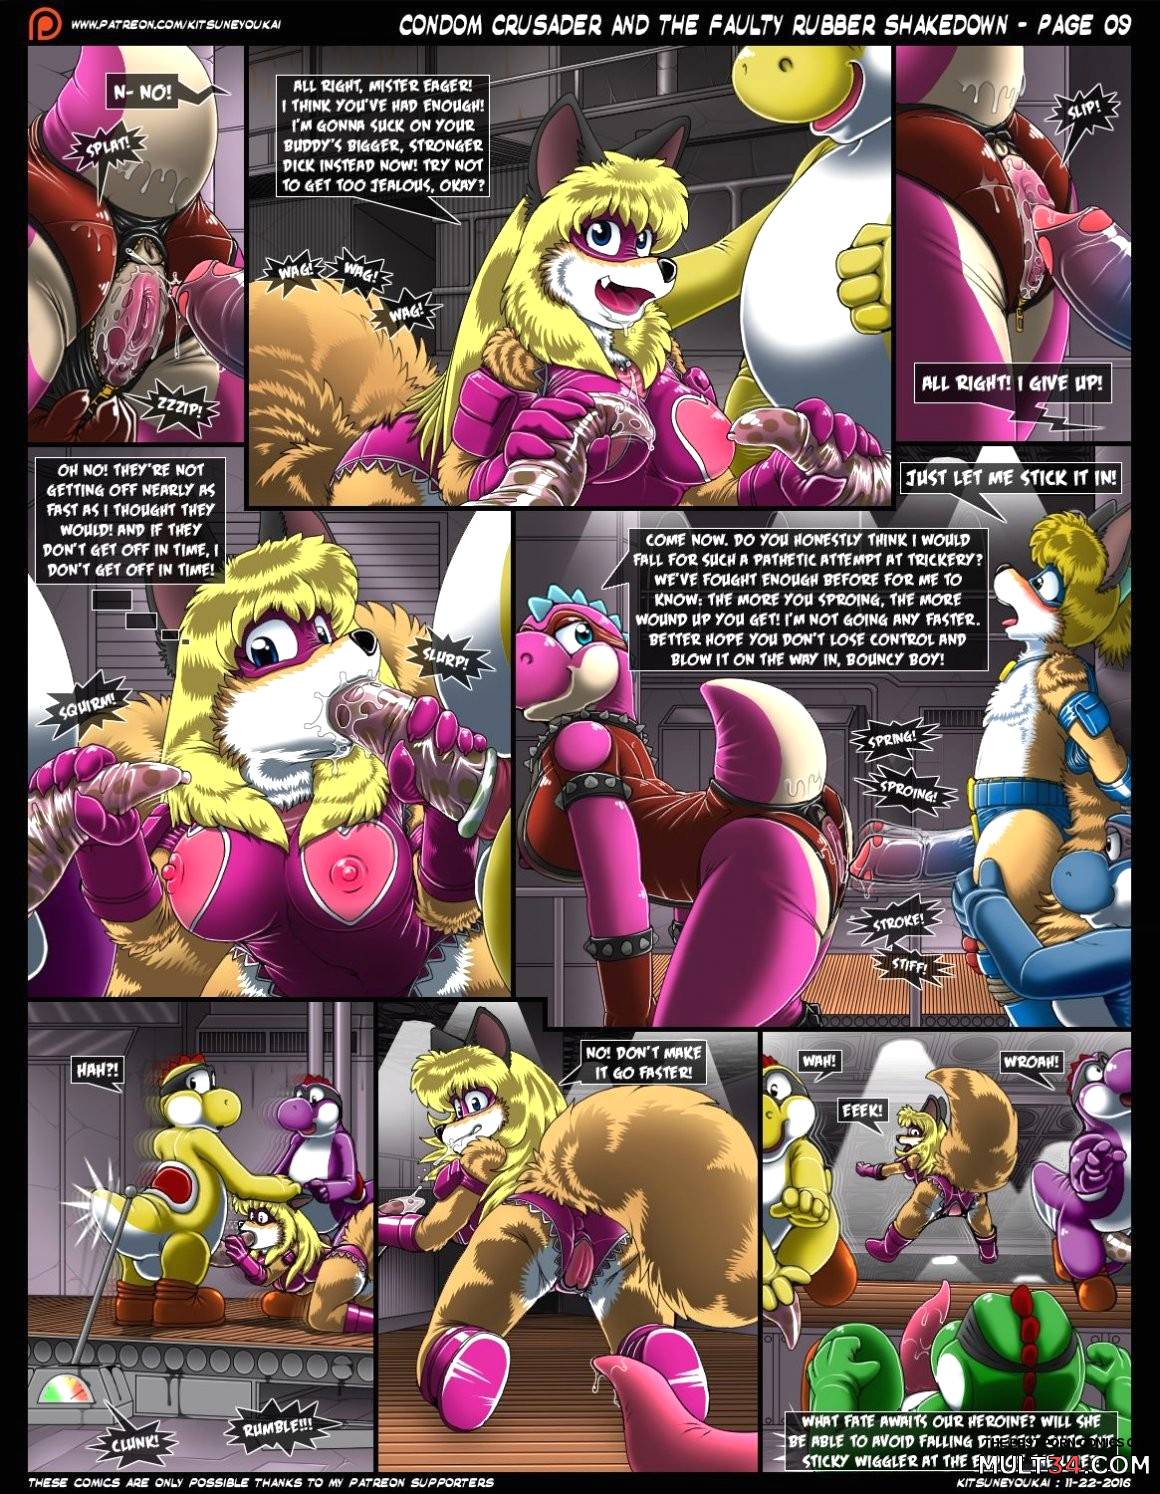 Condom Crusader And The Faulty Rubber Shakedown page 10